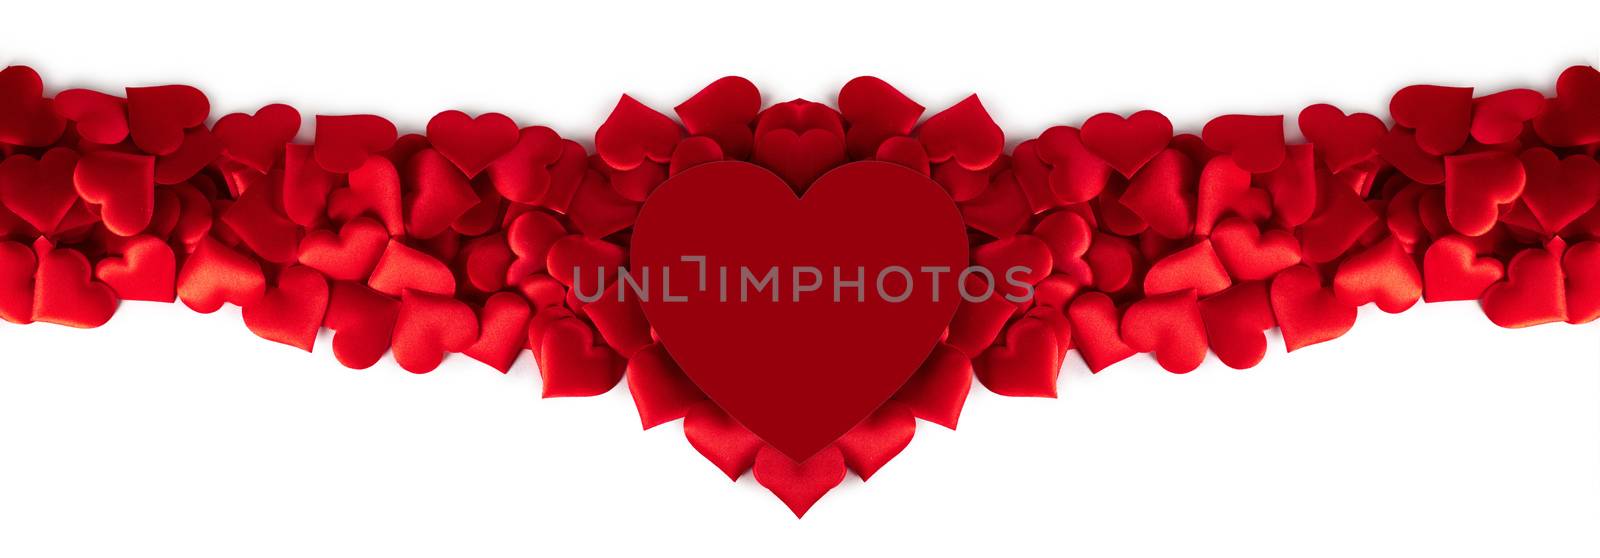 Valentine's day many red silk hearts and red heart shaped card isolated on white background, love concept